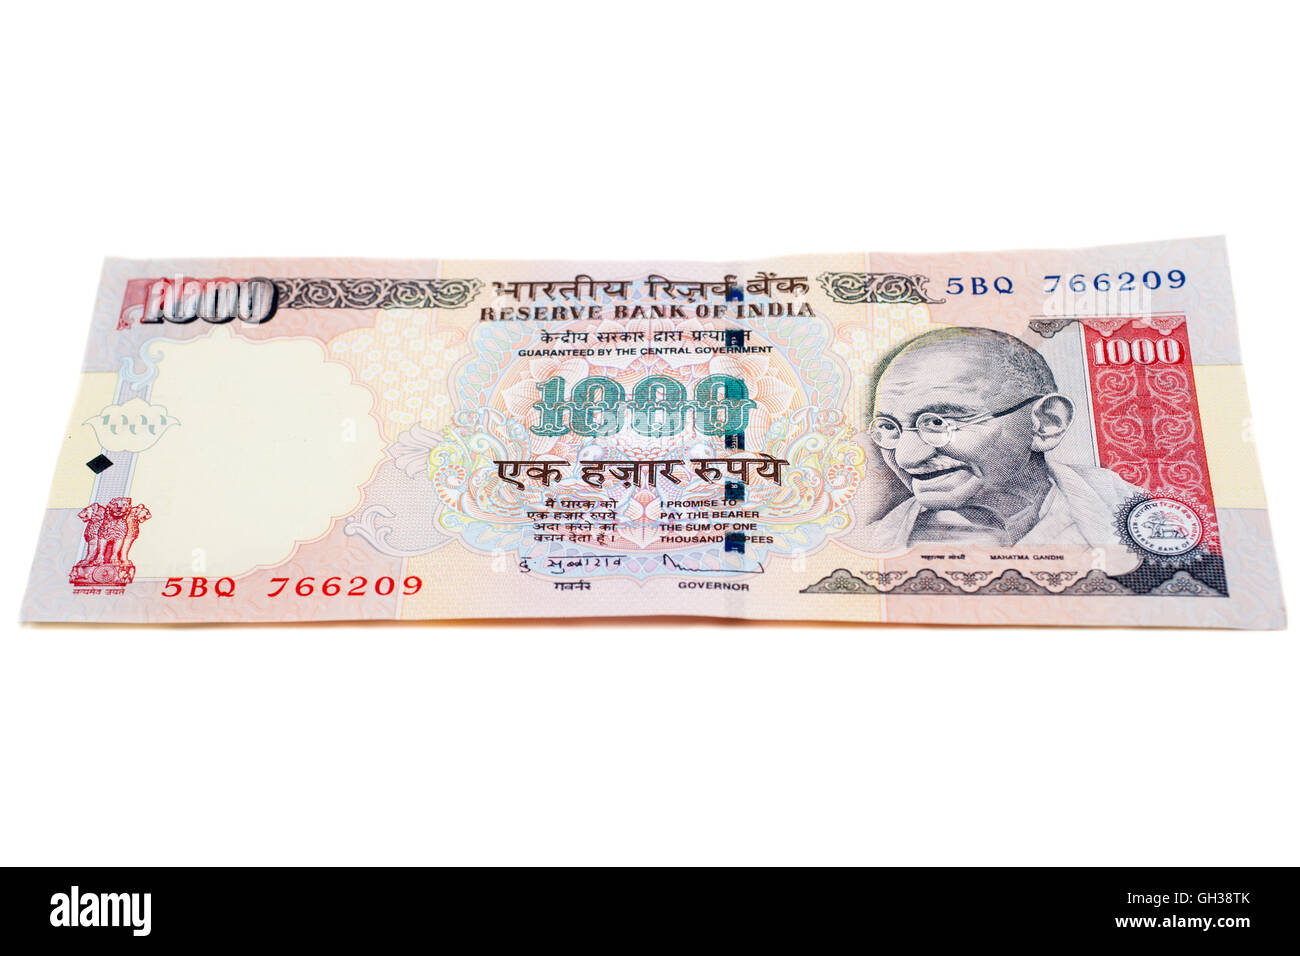 A one thousand rupee note (Indian Currency) isolated on a white background. Stock Photo